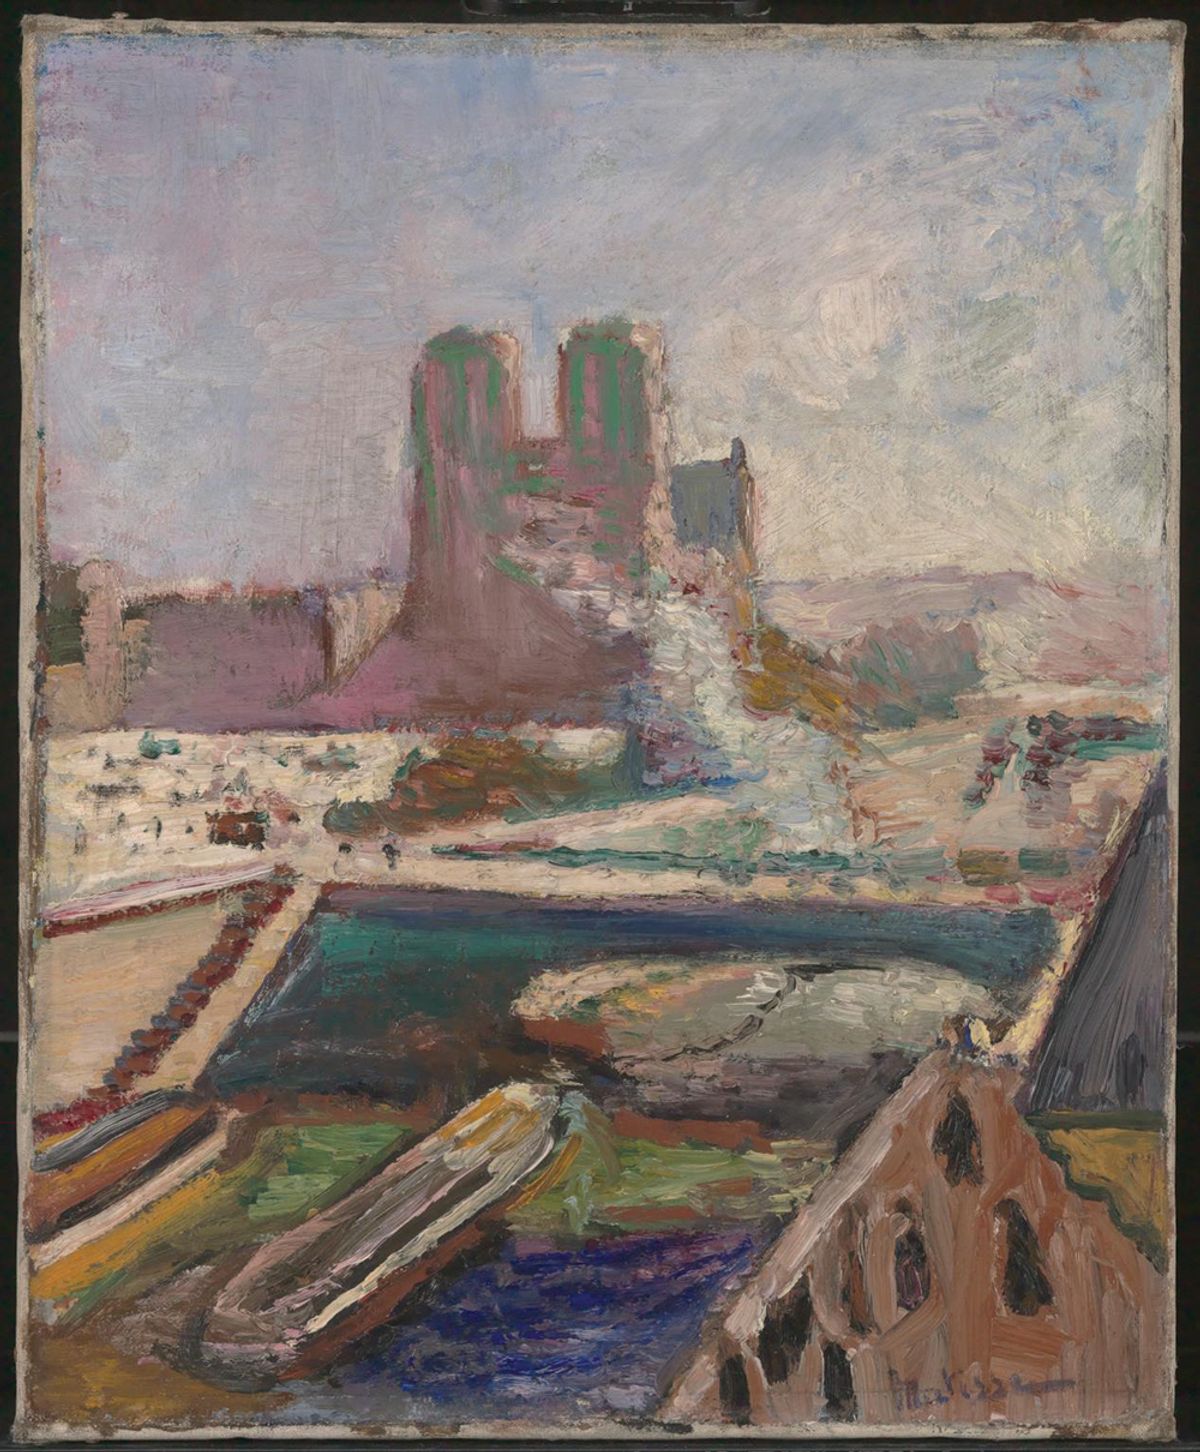 Matisse painted many versions  of Notre Dame around 1900 DACS